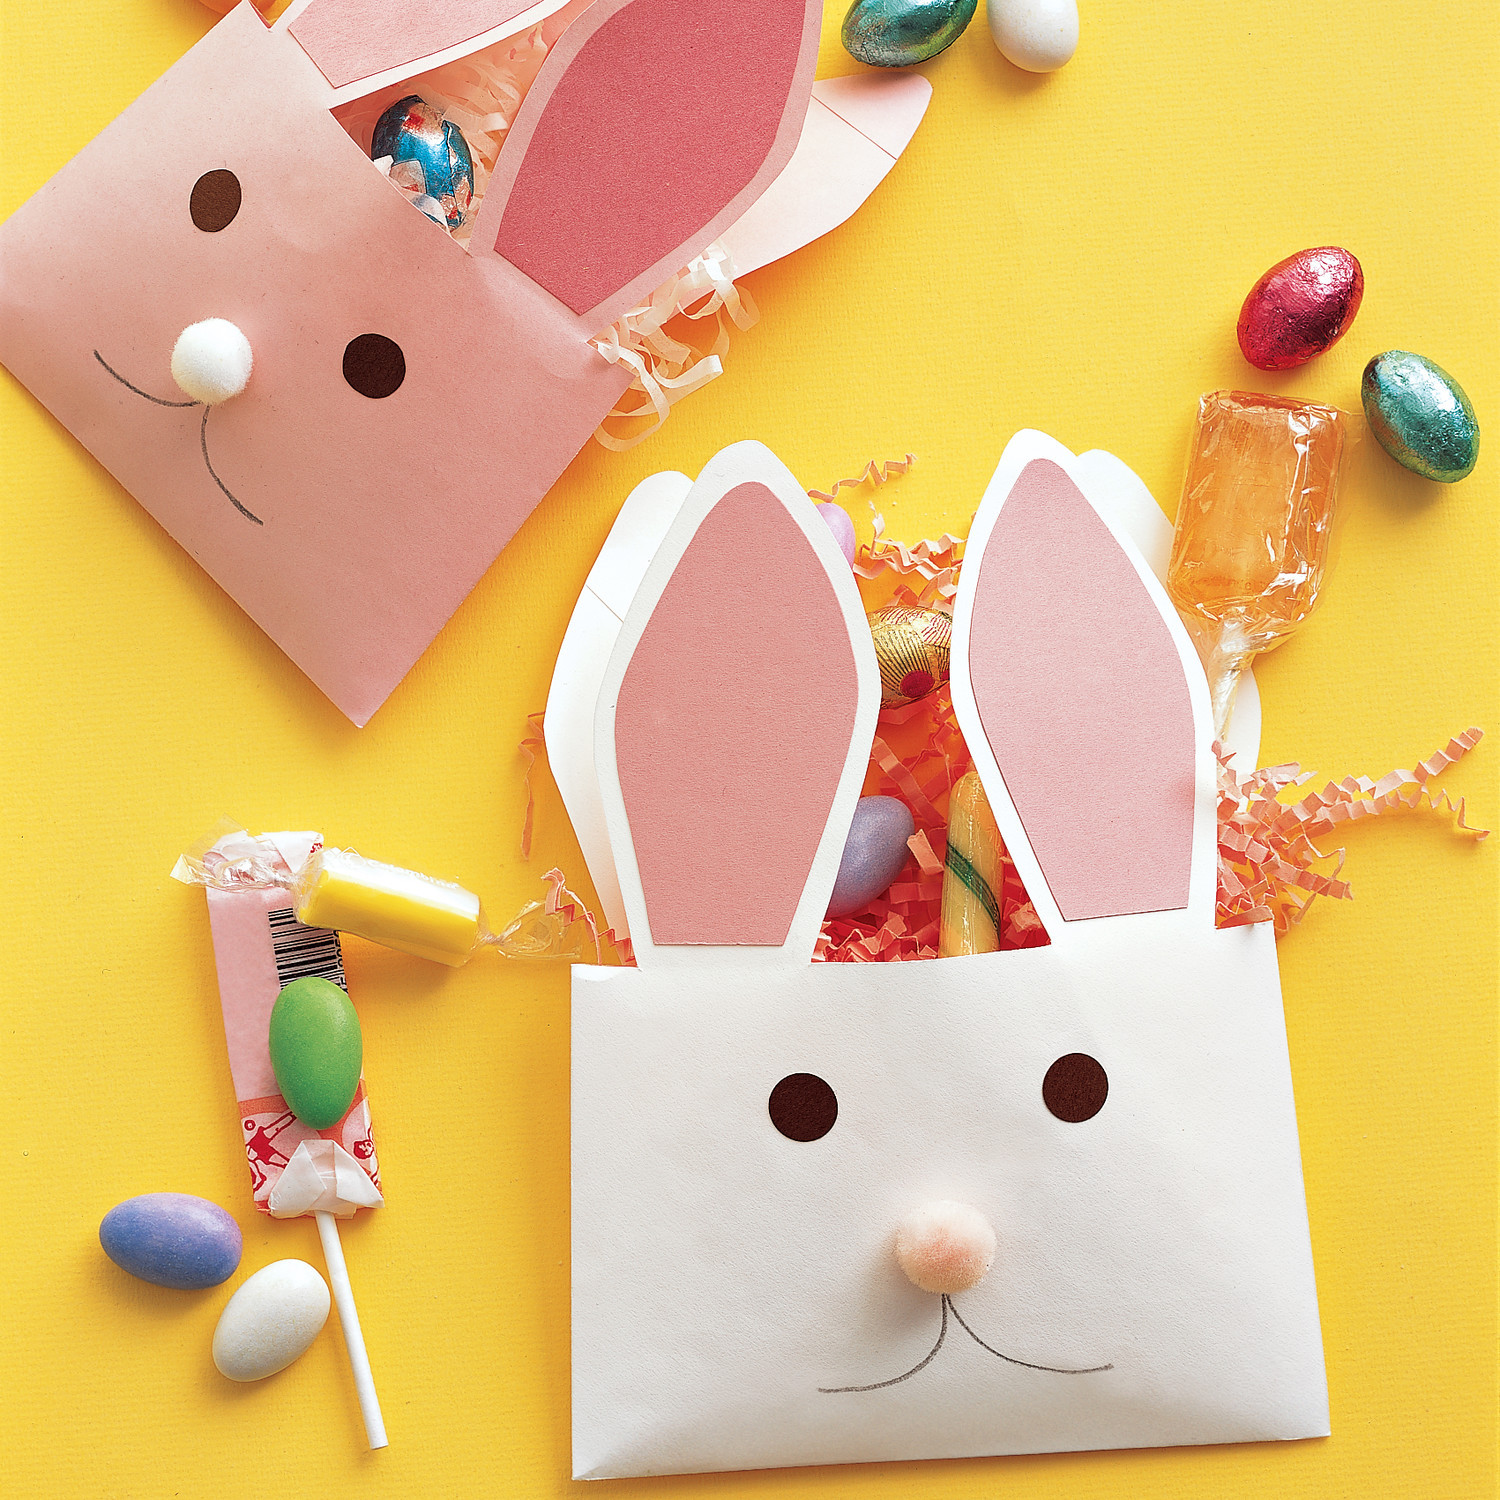 Crafts For Easter
 The Best Easter Crafts and Activities for Kids